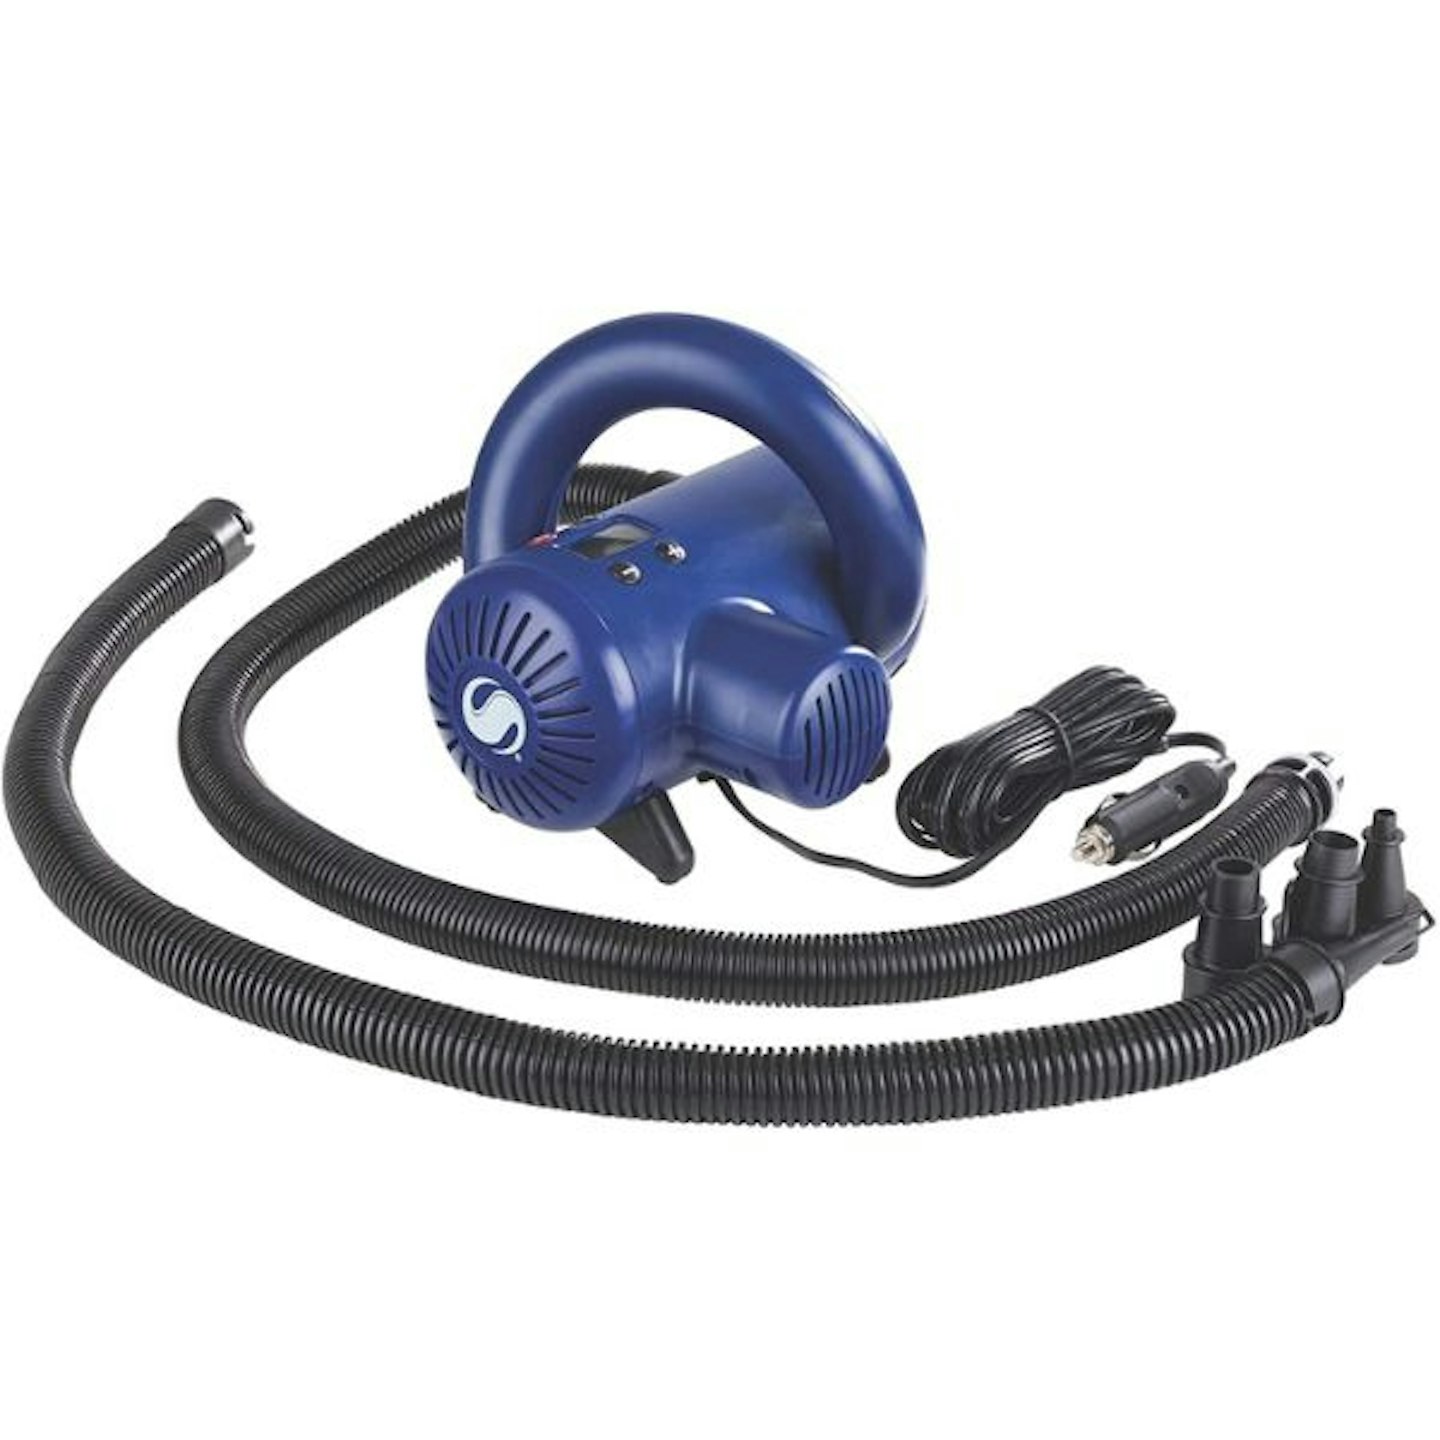 Sevylor SUP and Water Sport Electric Pump